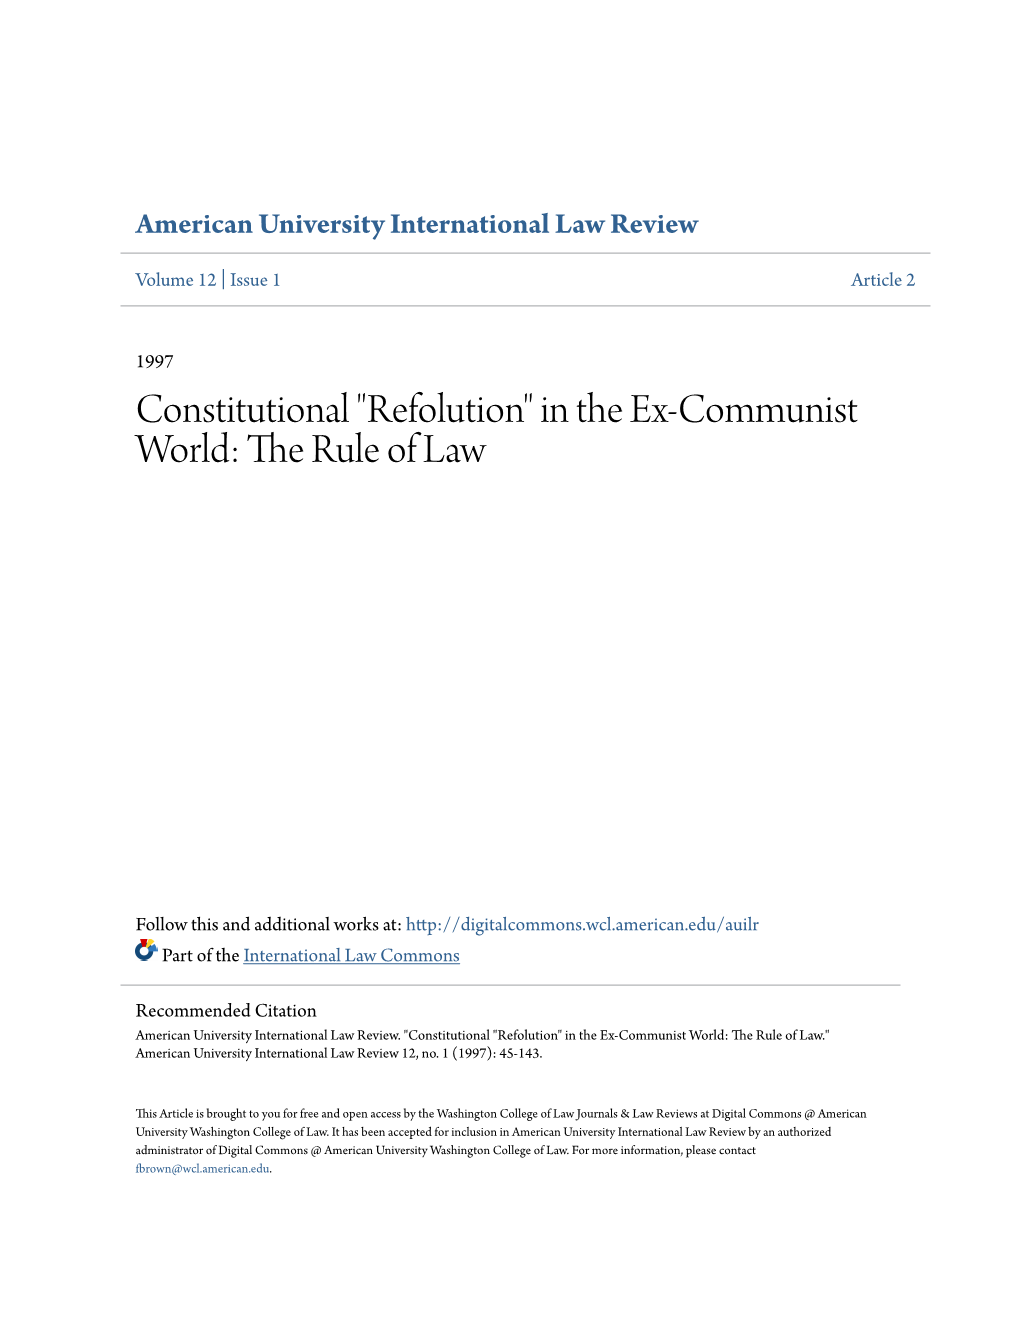 Constitutional "Refolution" in the Ex-Communist World: the Rule of Law